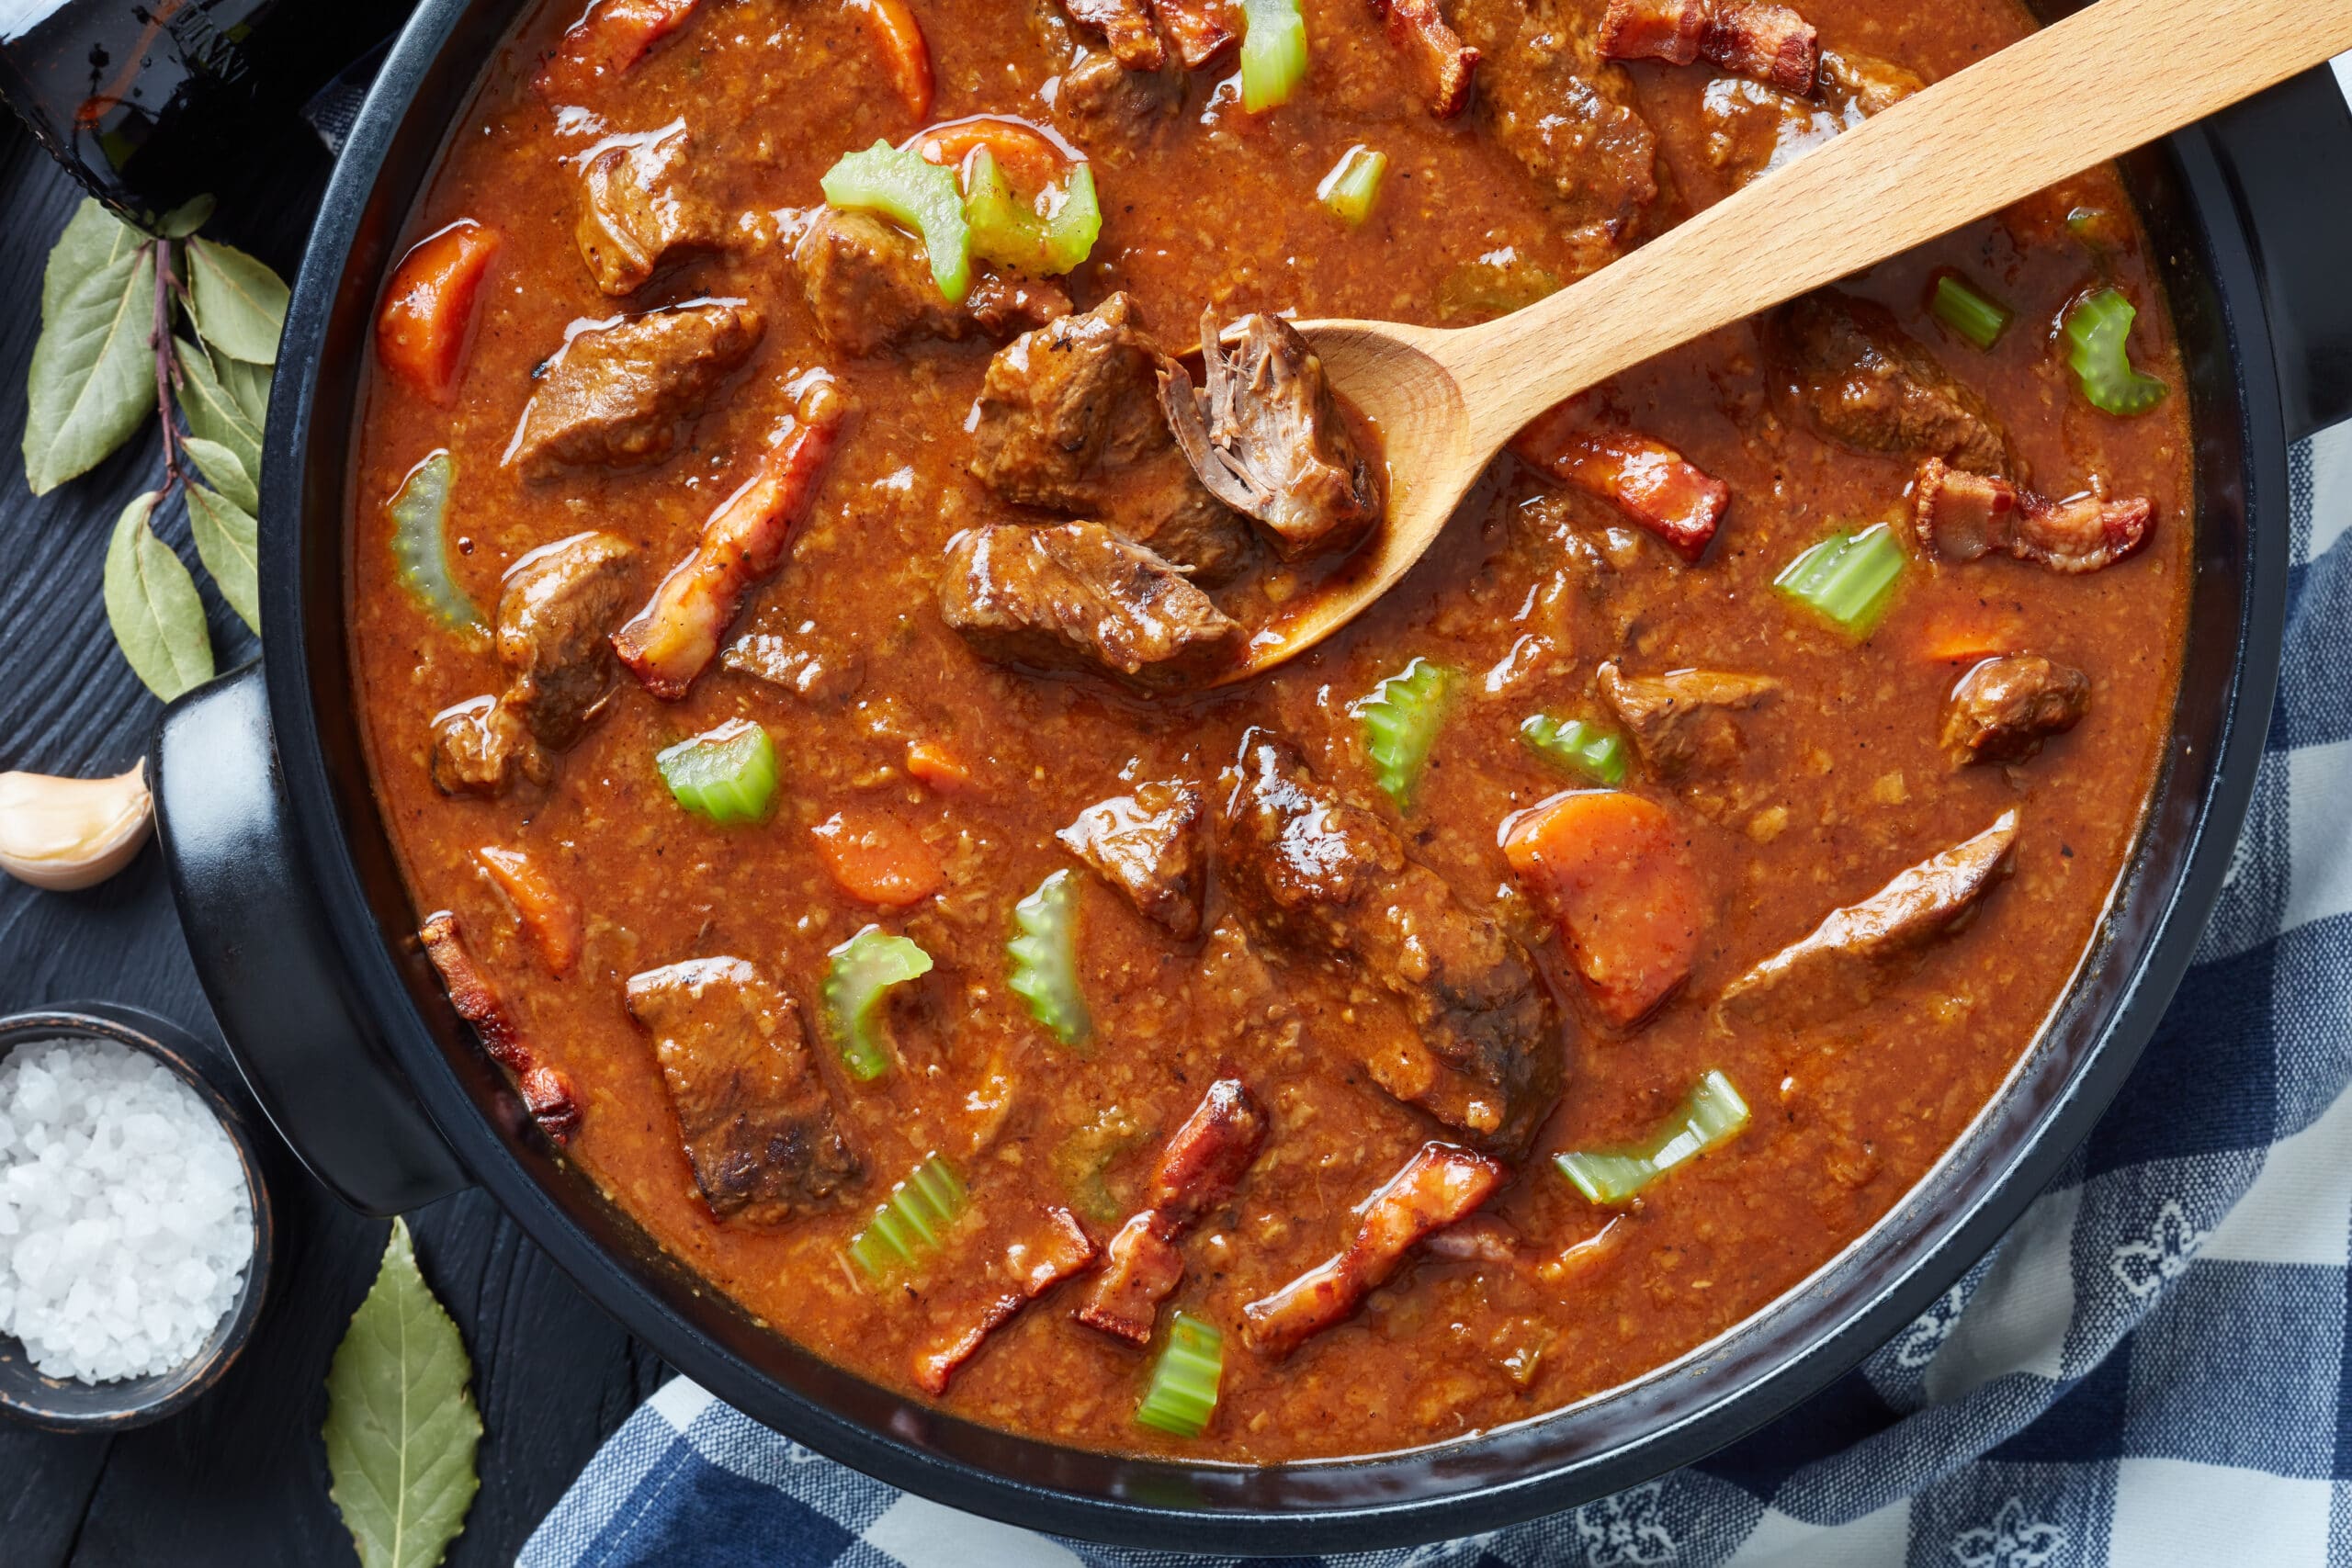 Goulash, a meat and vegetable stew 